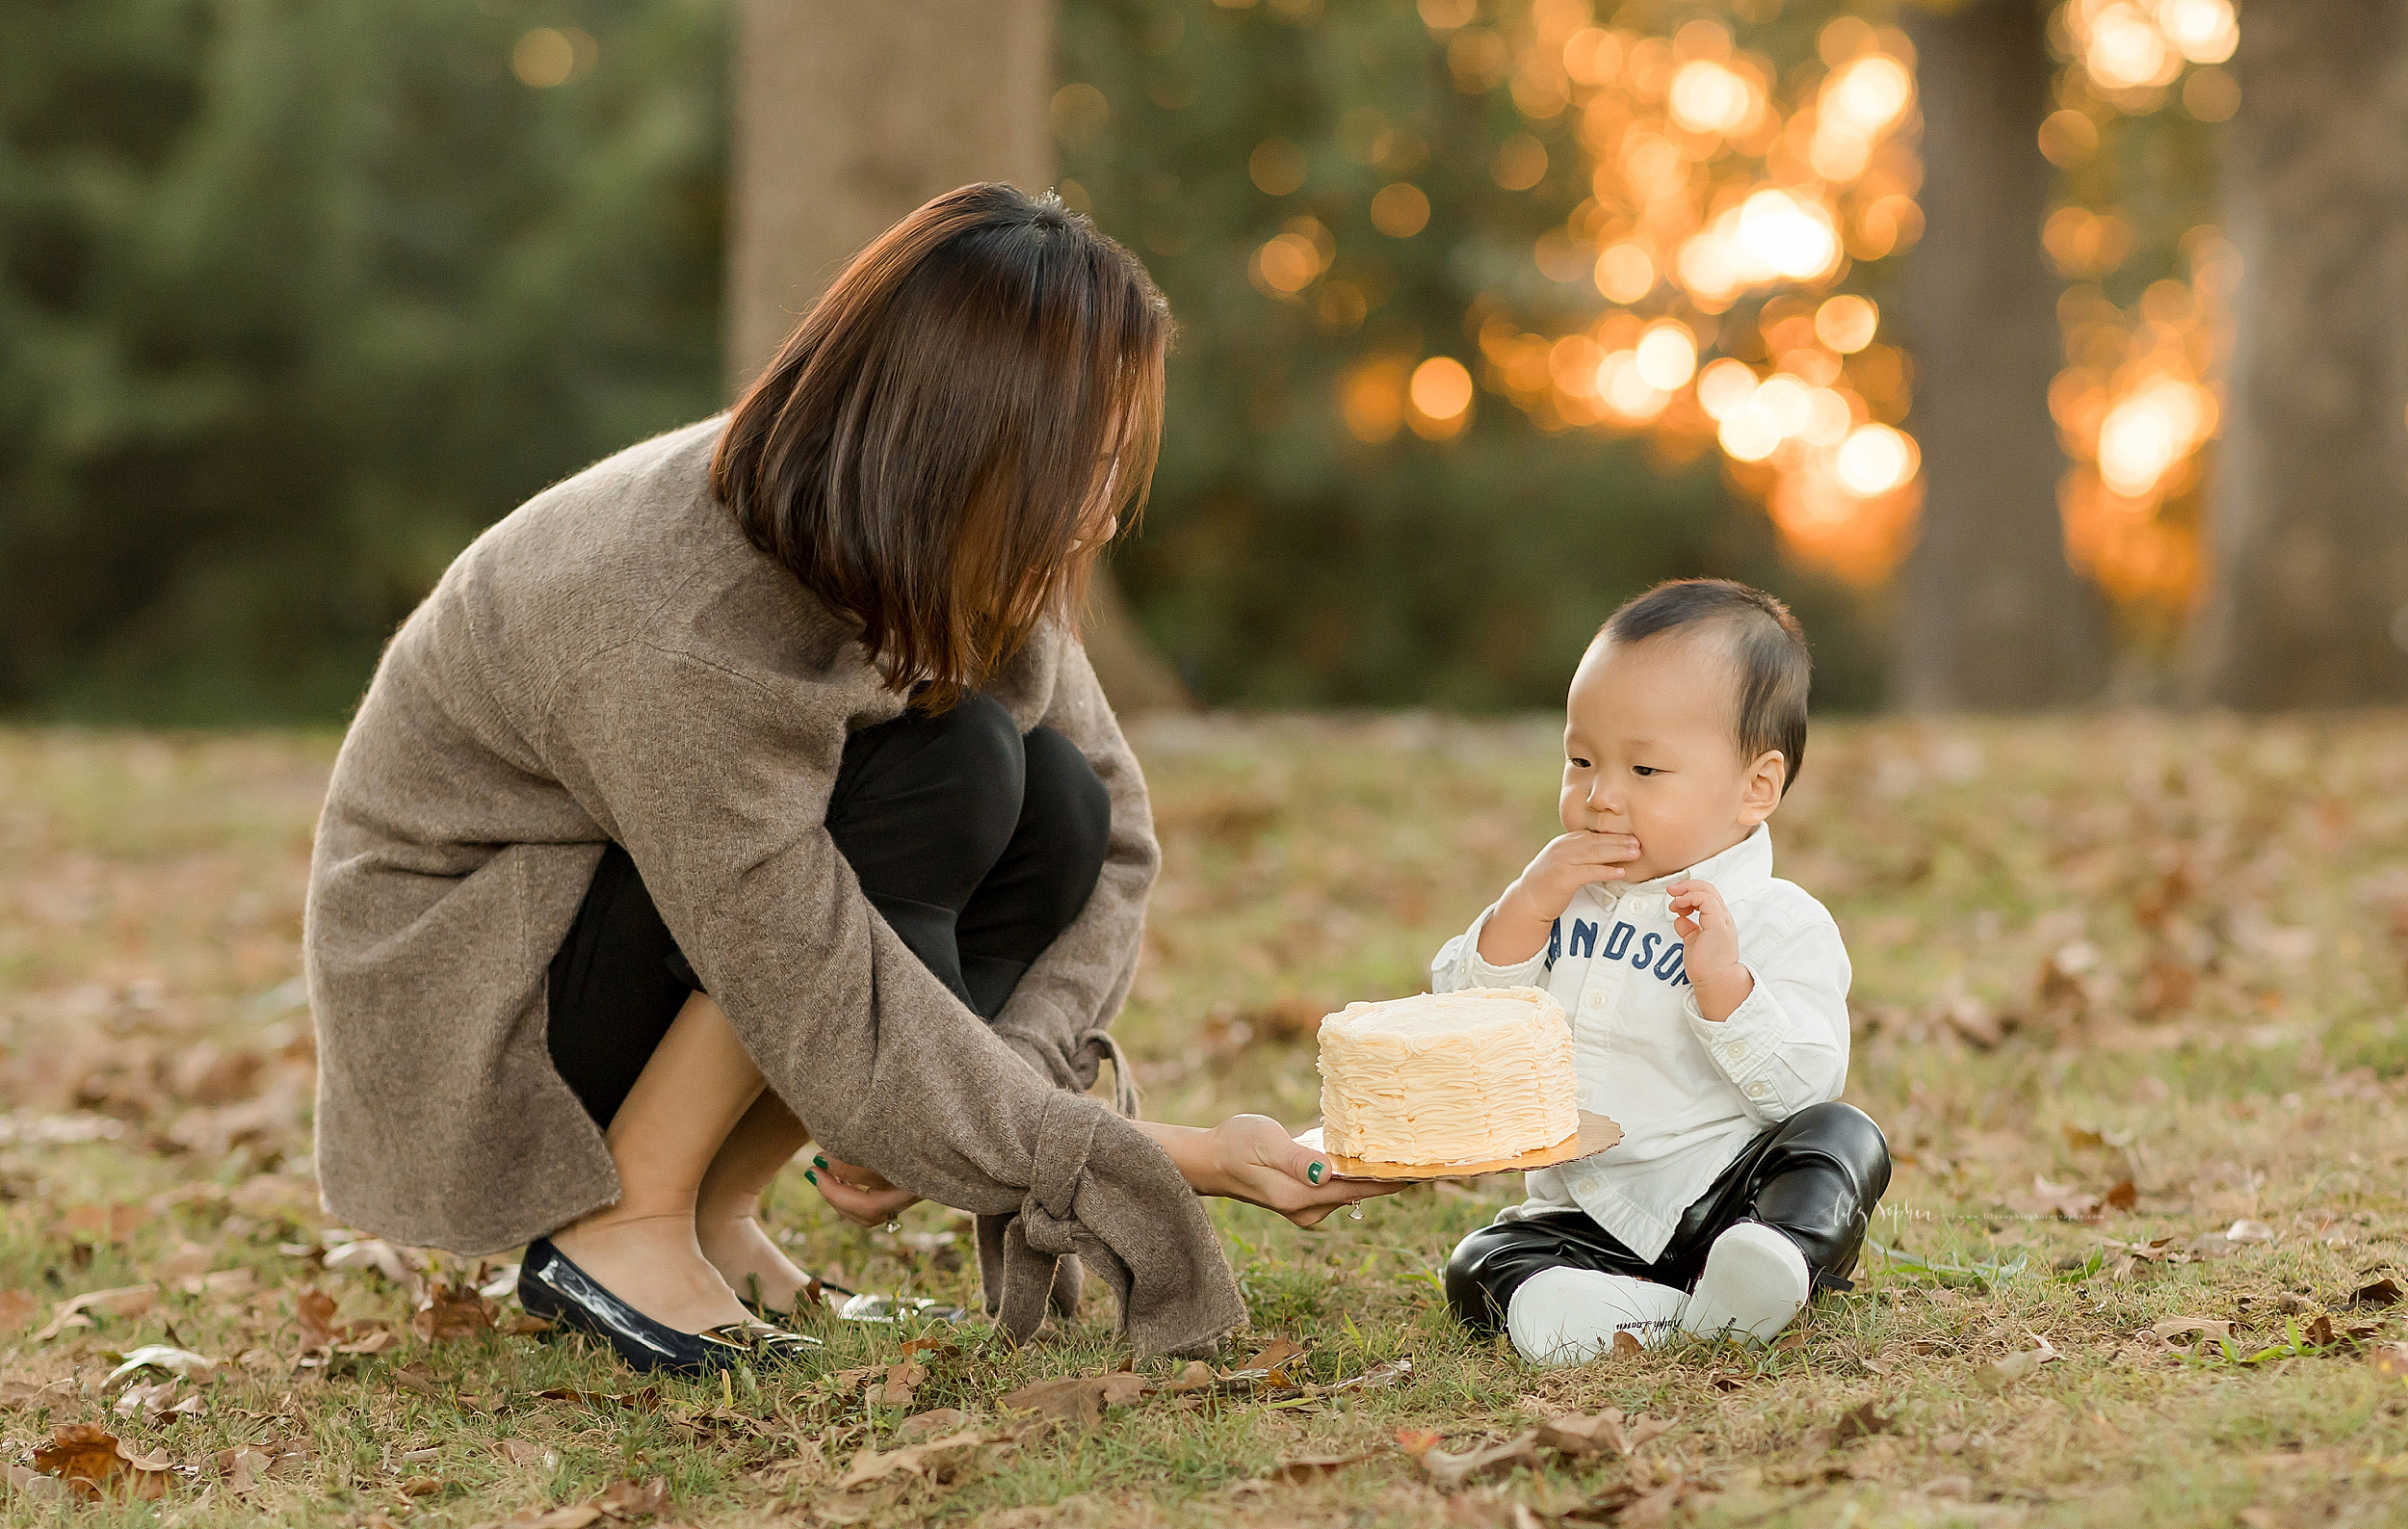 atlanta-buckhead-brookhaven-decatur-lily-sophia-photography--photographer-portraits-grant-park-intown-park-sunset-first-birthday-cake-smash-one-year-old-outdoors-cool-asian-american-family_0092.jpg